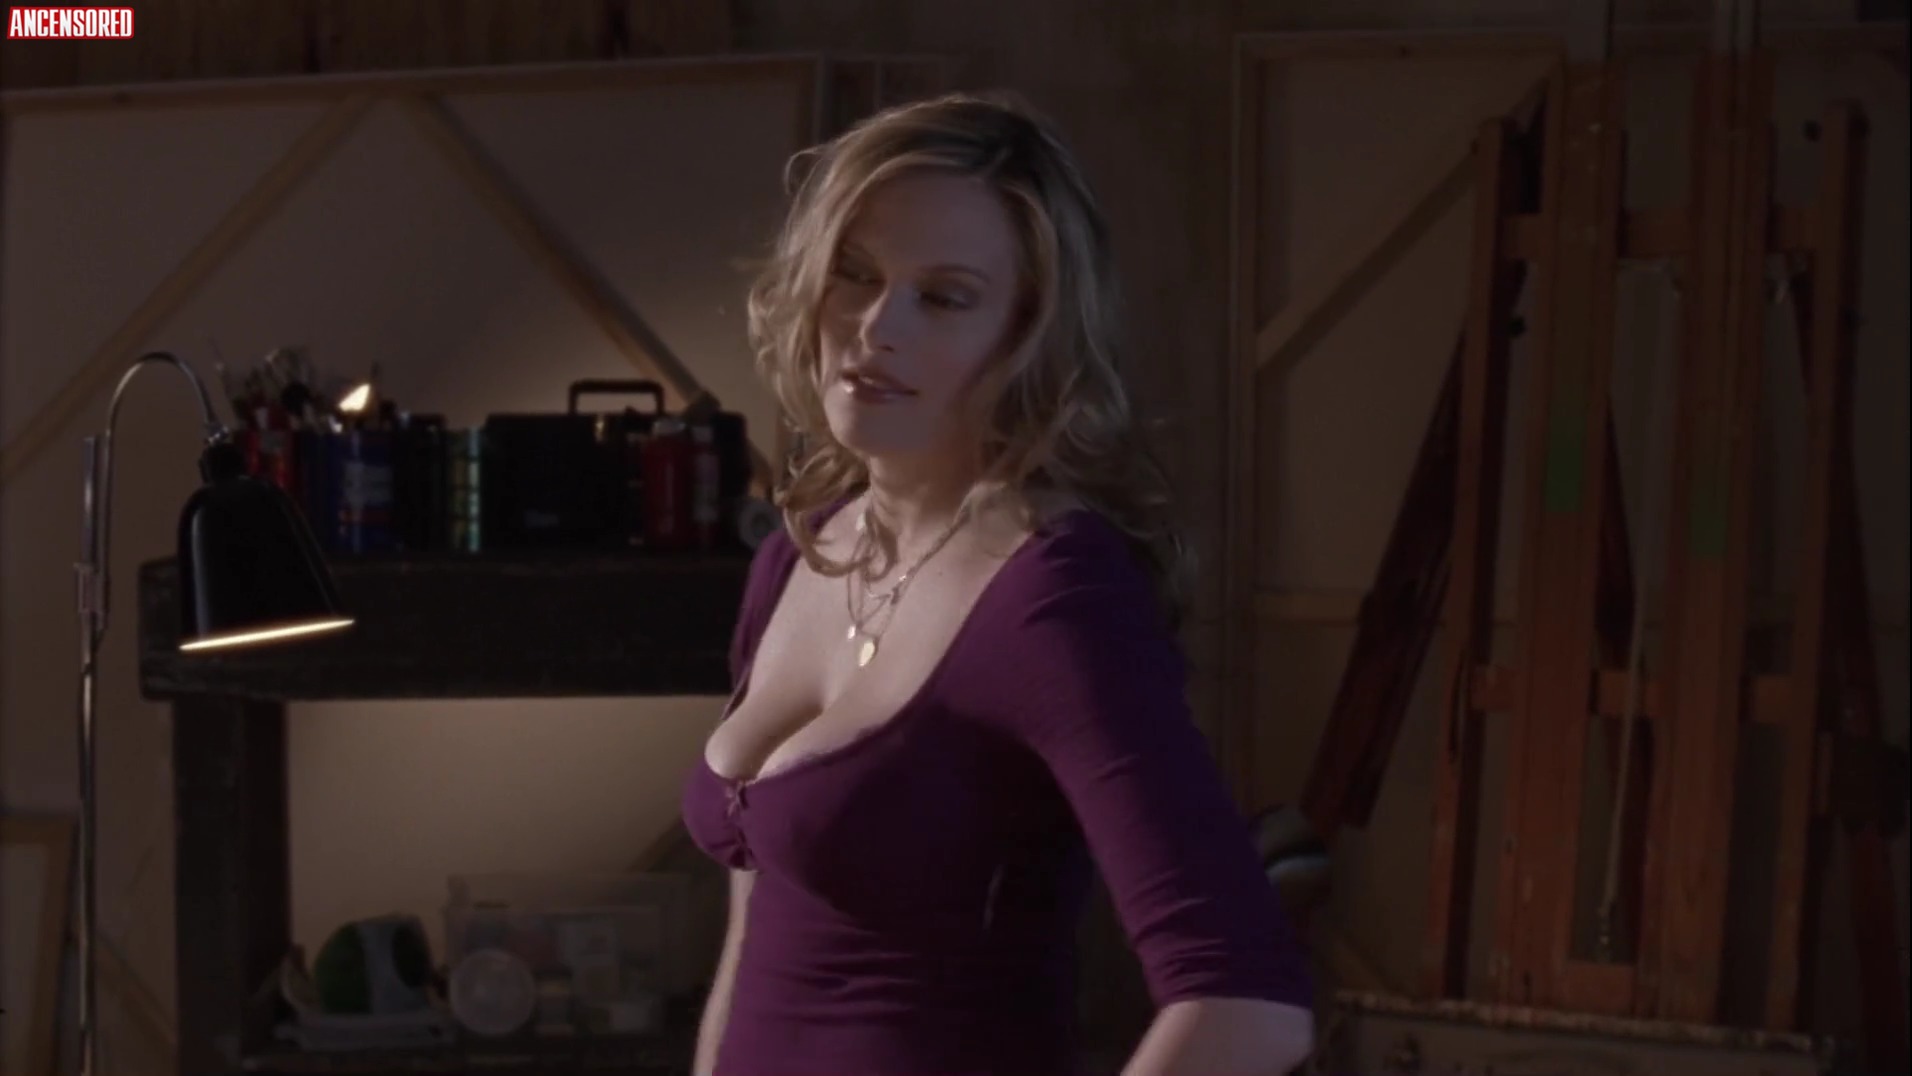 Vinessa shaw nude pictures